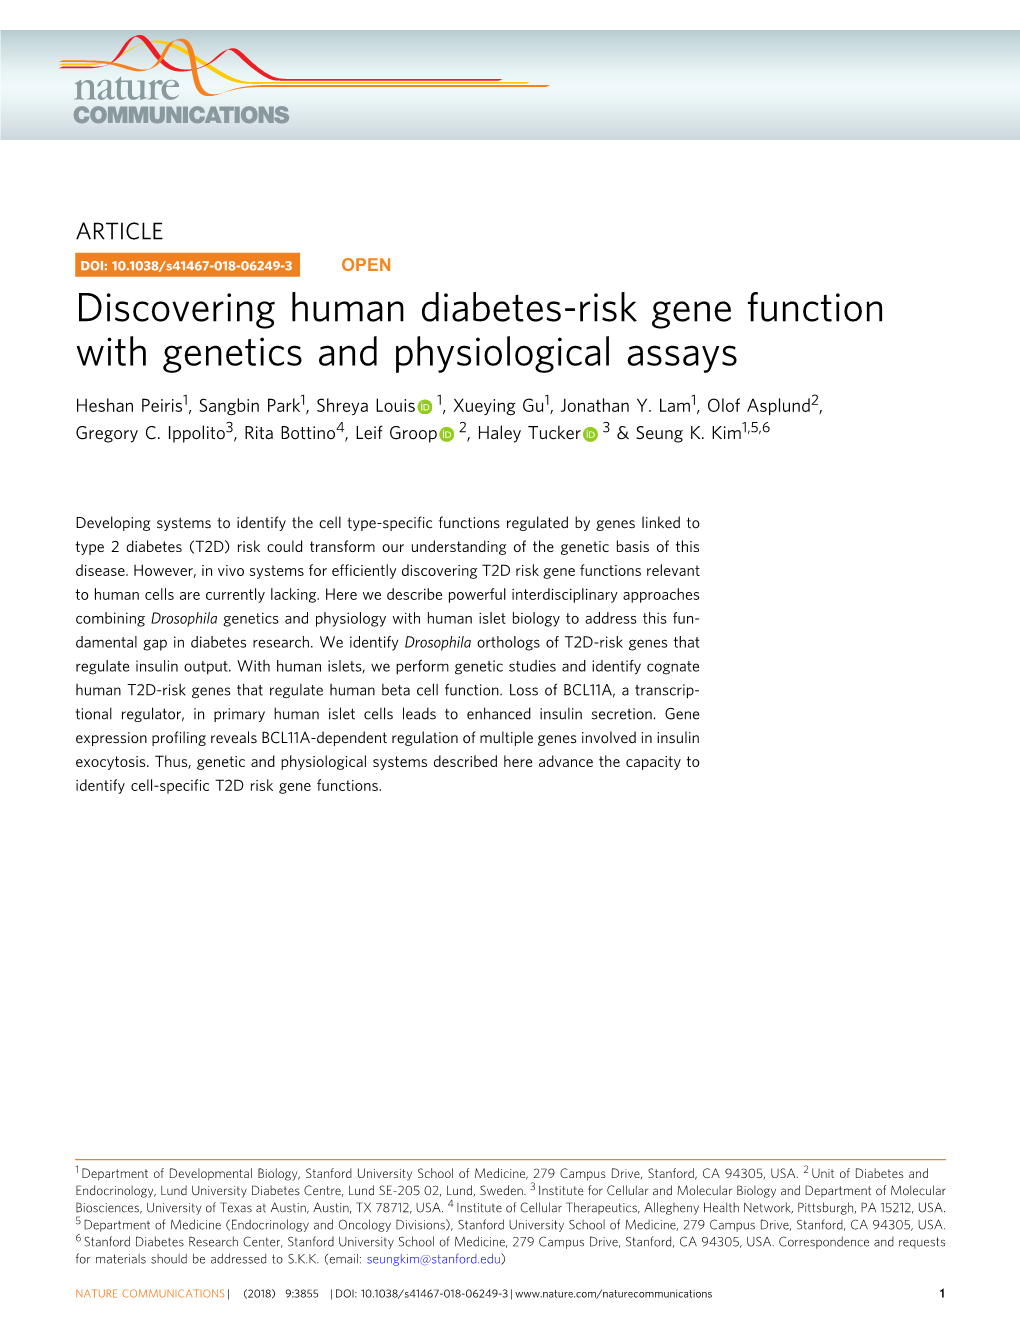 Discovering Human Diabetes-Risk Gene Function with Genetics and Physiological Assays